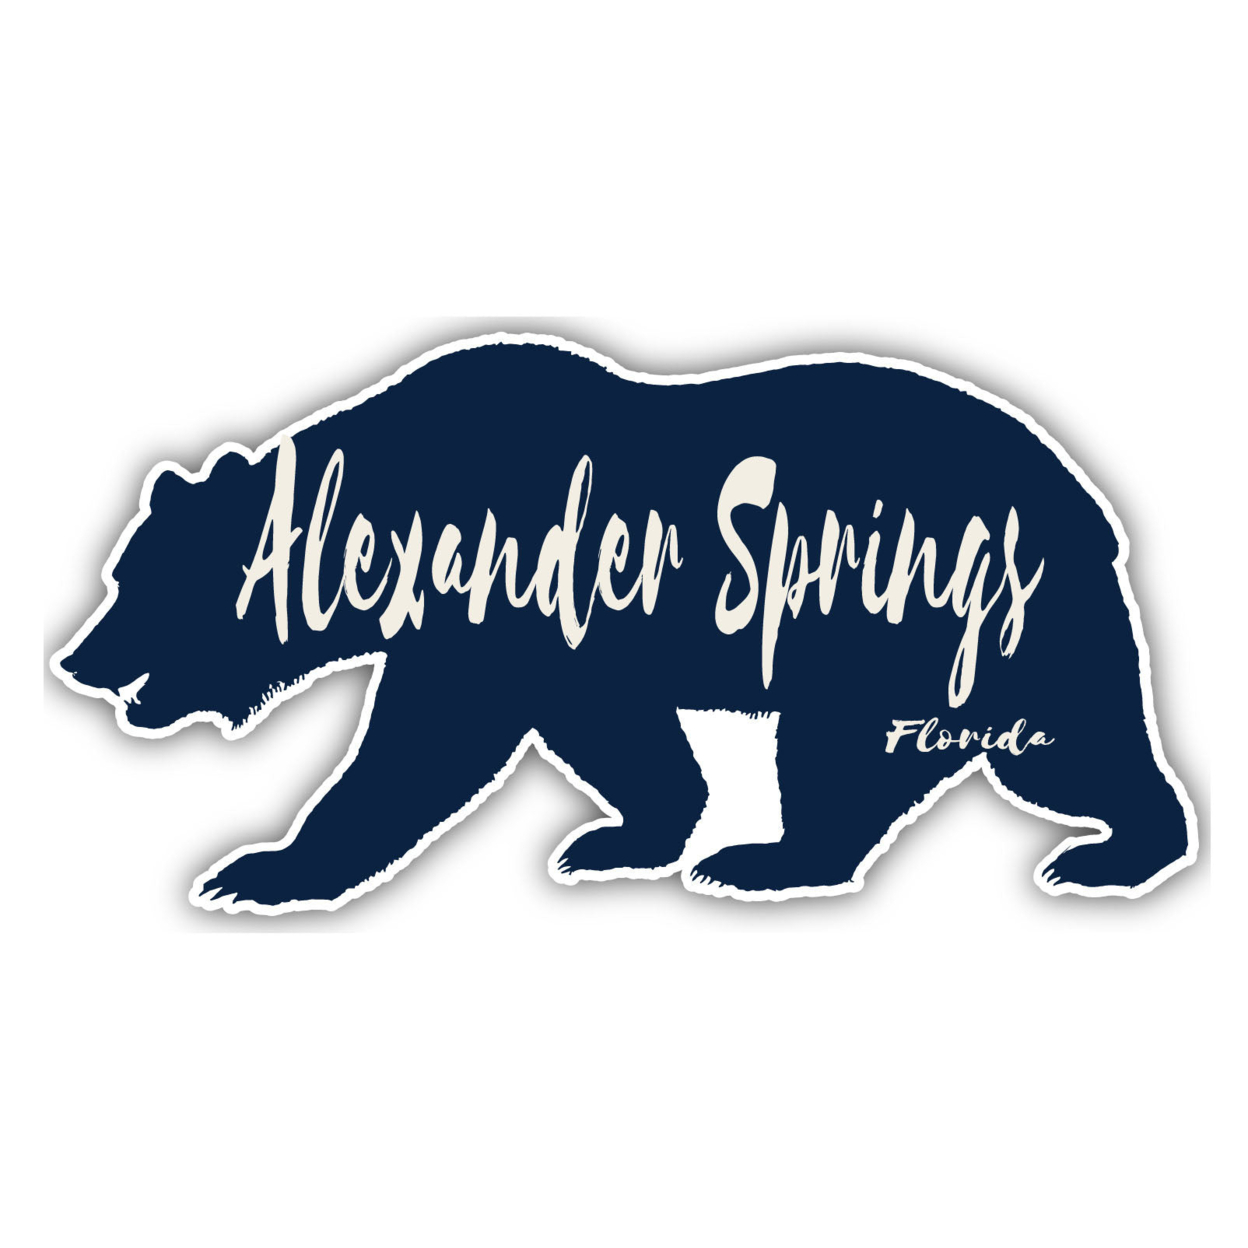 Alexander Springs Florida Souvenir Decorative Stickers (Choose Theme And Size) - 4-Pack, 4-Inch, Bear